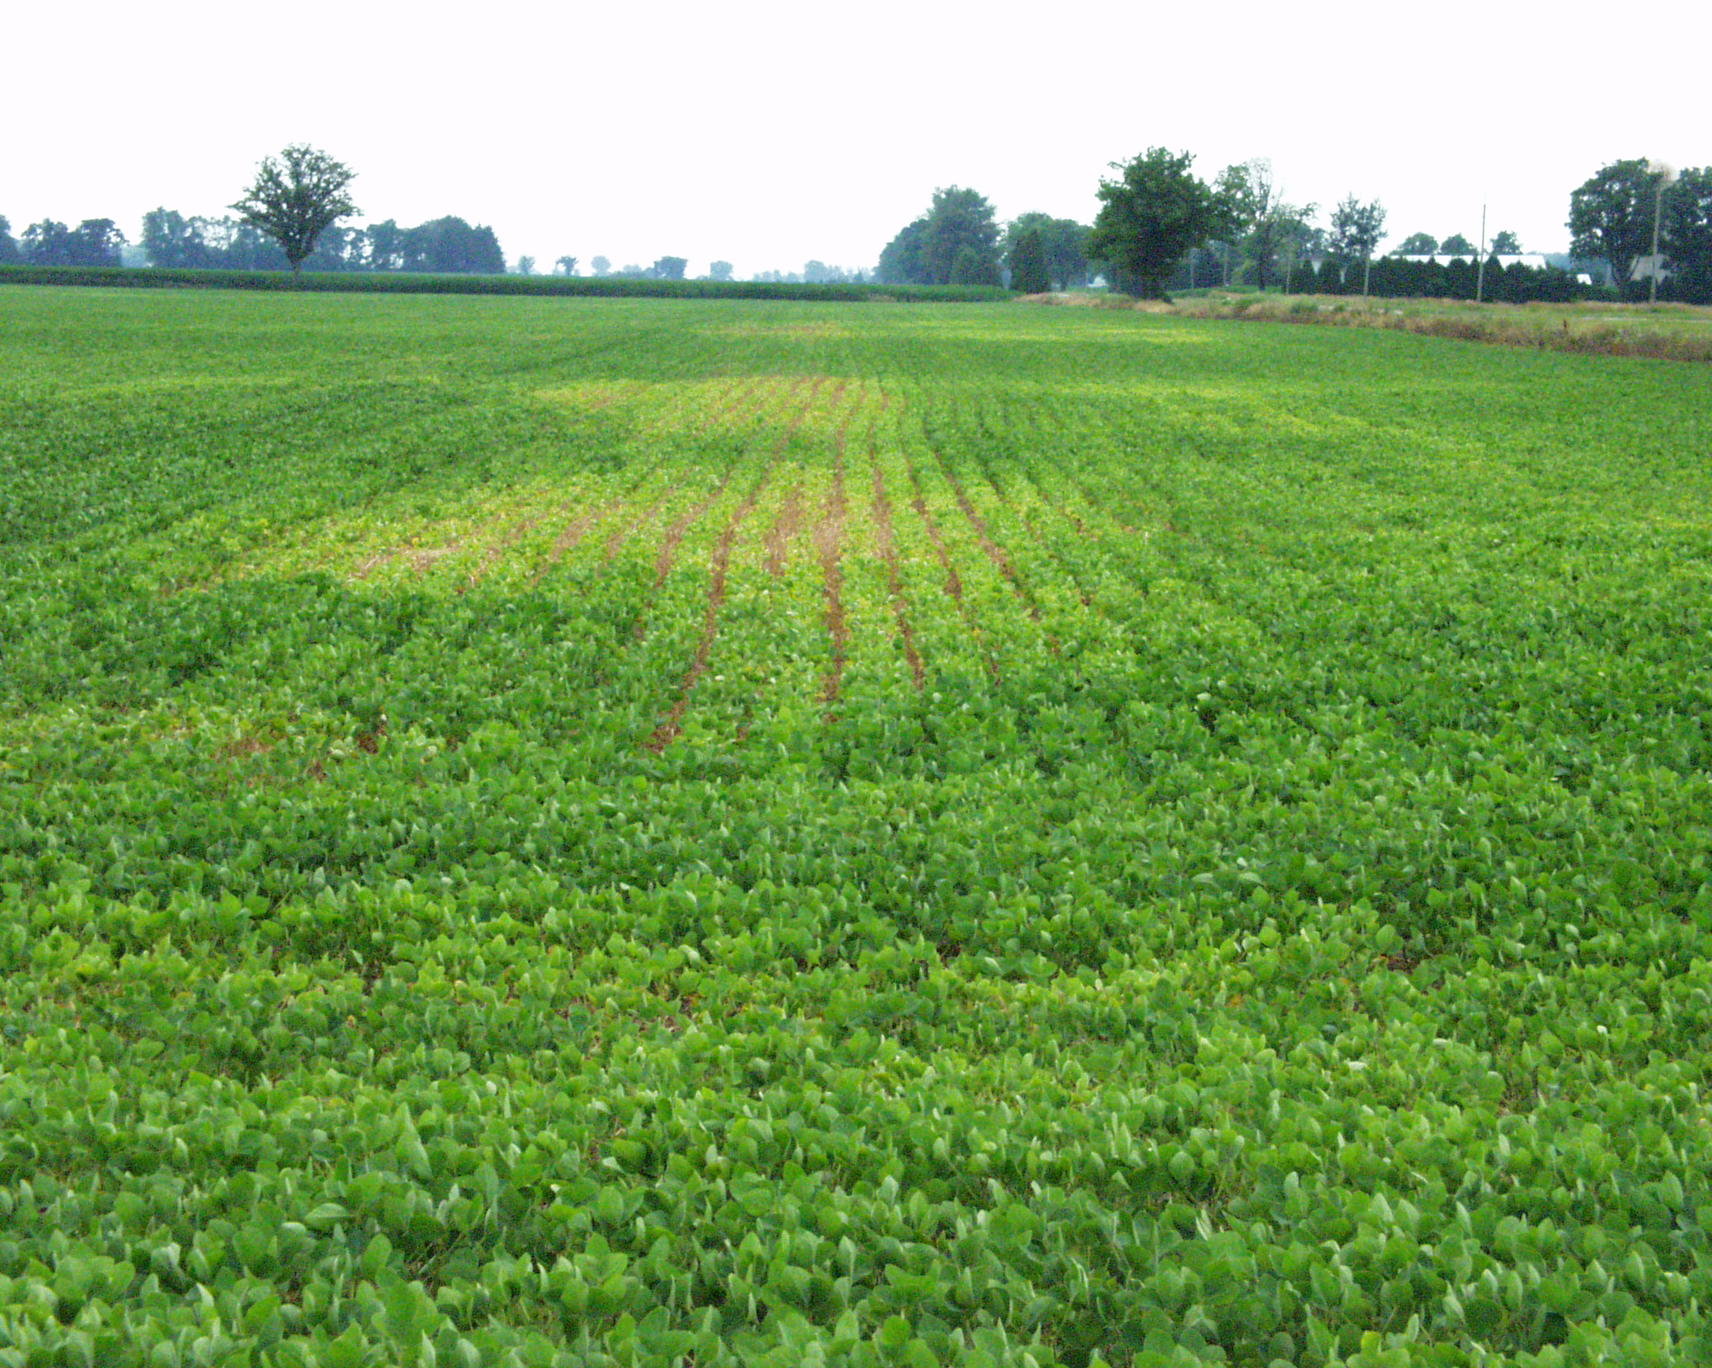 Aboveground symptoms of soybean cyst nematode infestation can be confused with other diseases.